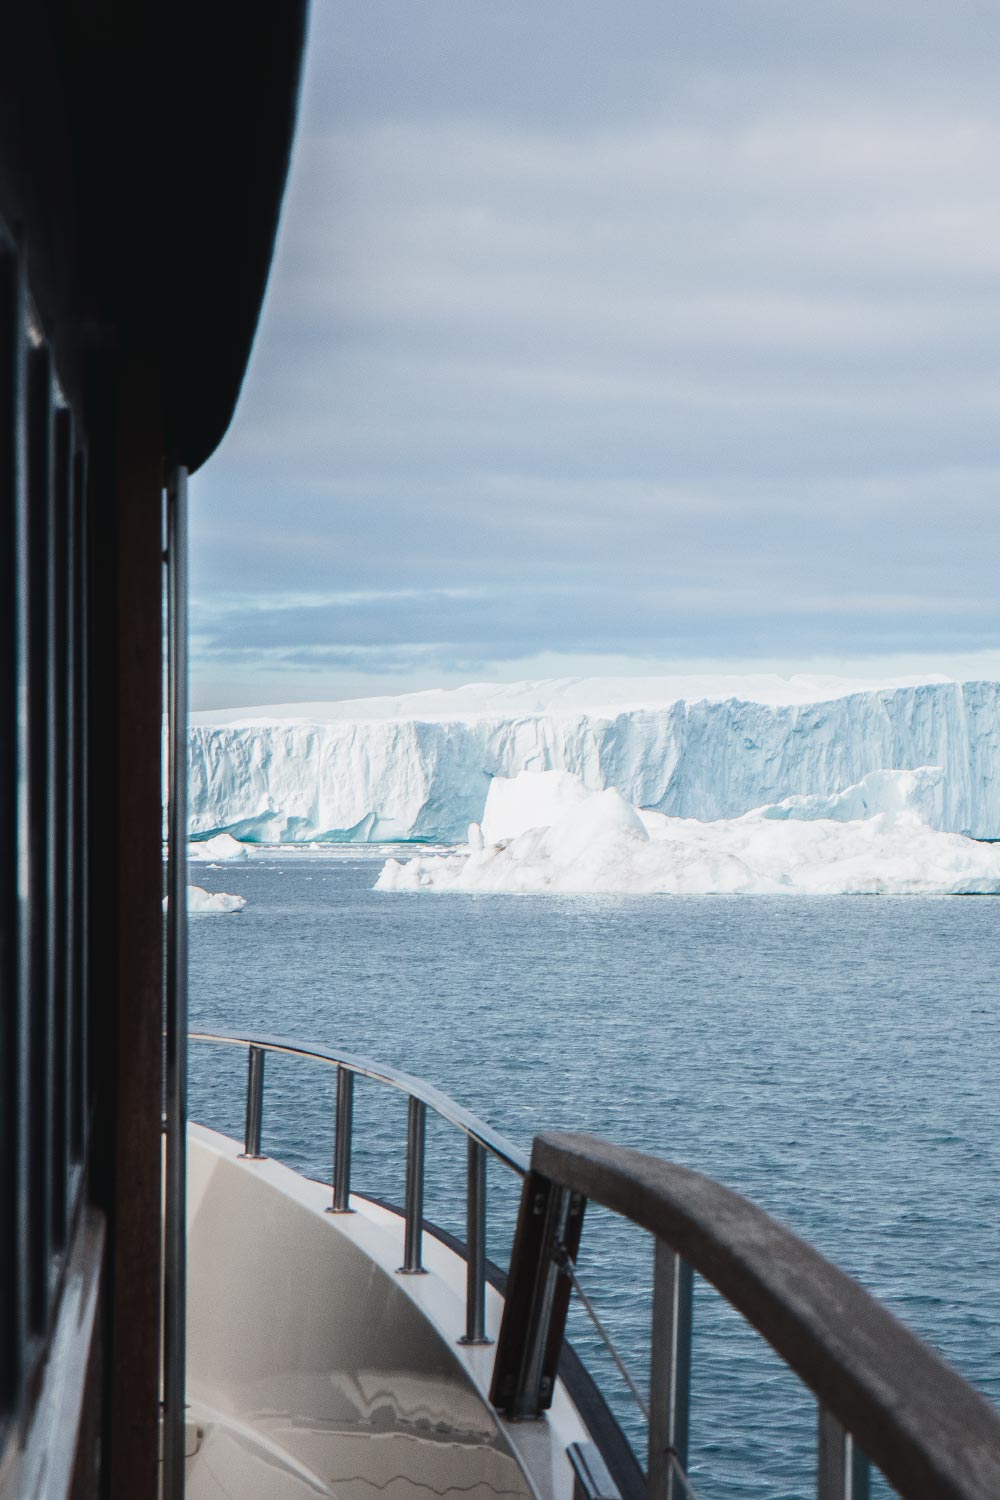 Sailing amidst giants – Our whale watching tour in Ilulissat offered front-row seats to Greenland's majestic iceberg-filled landscape.